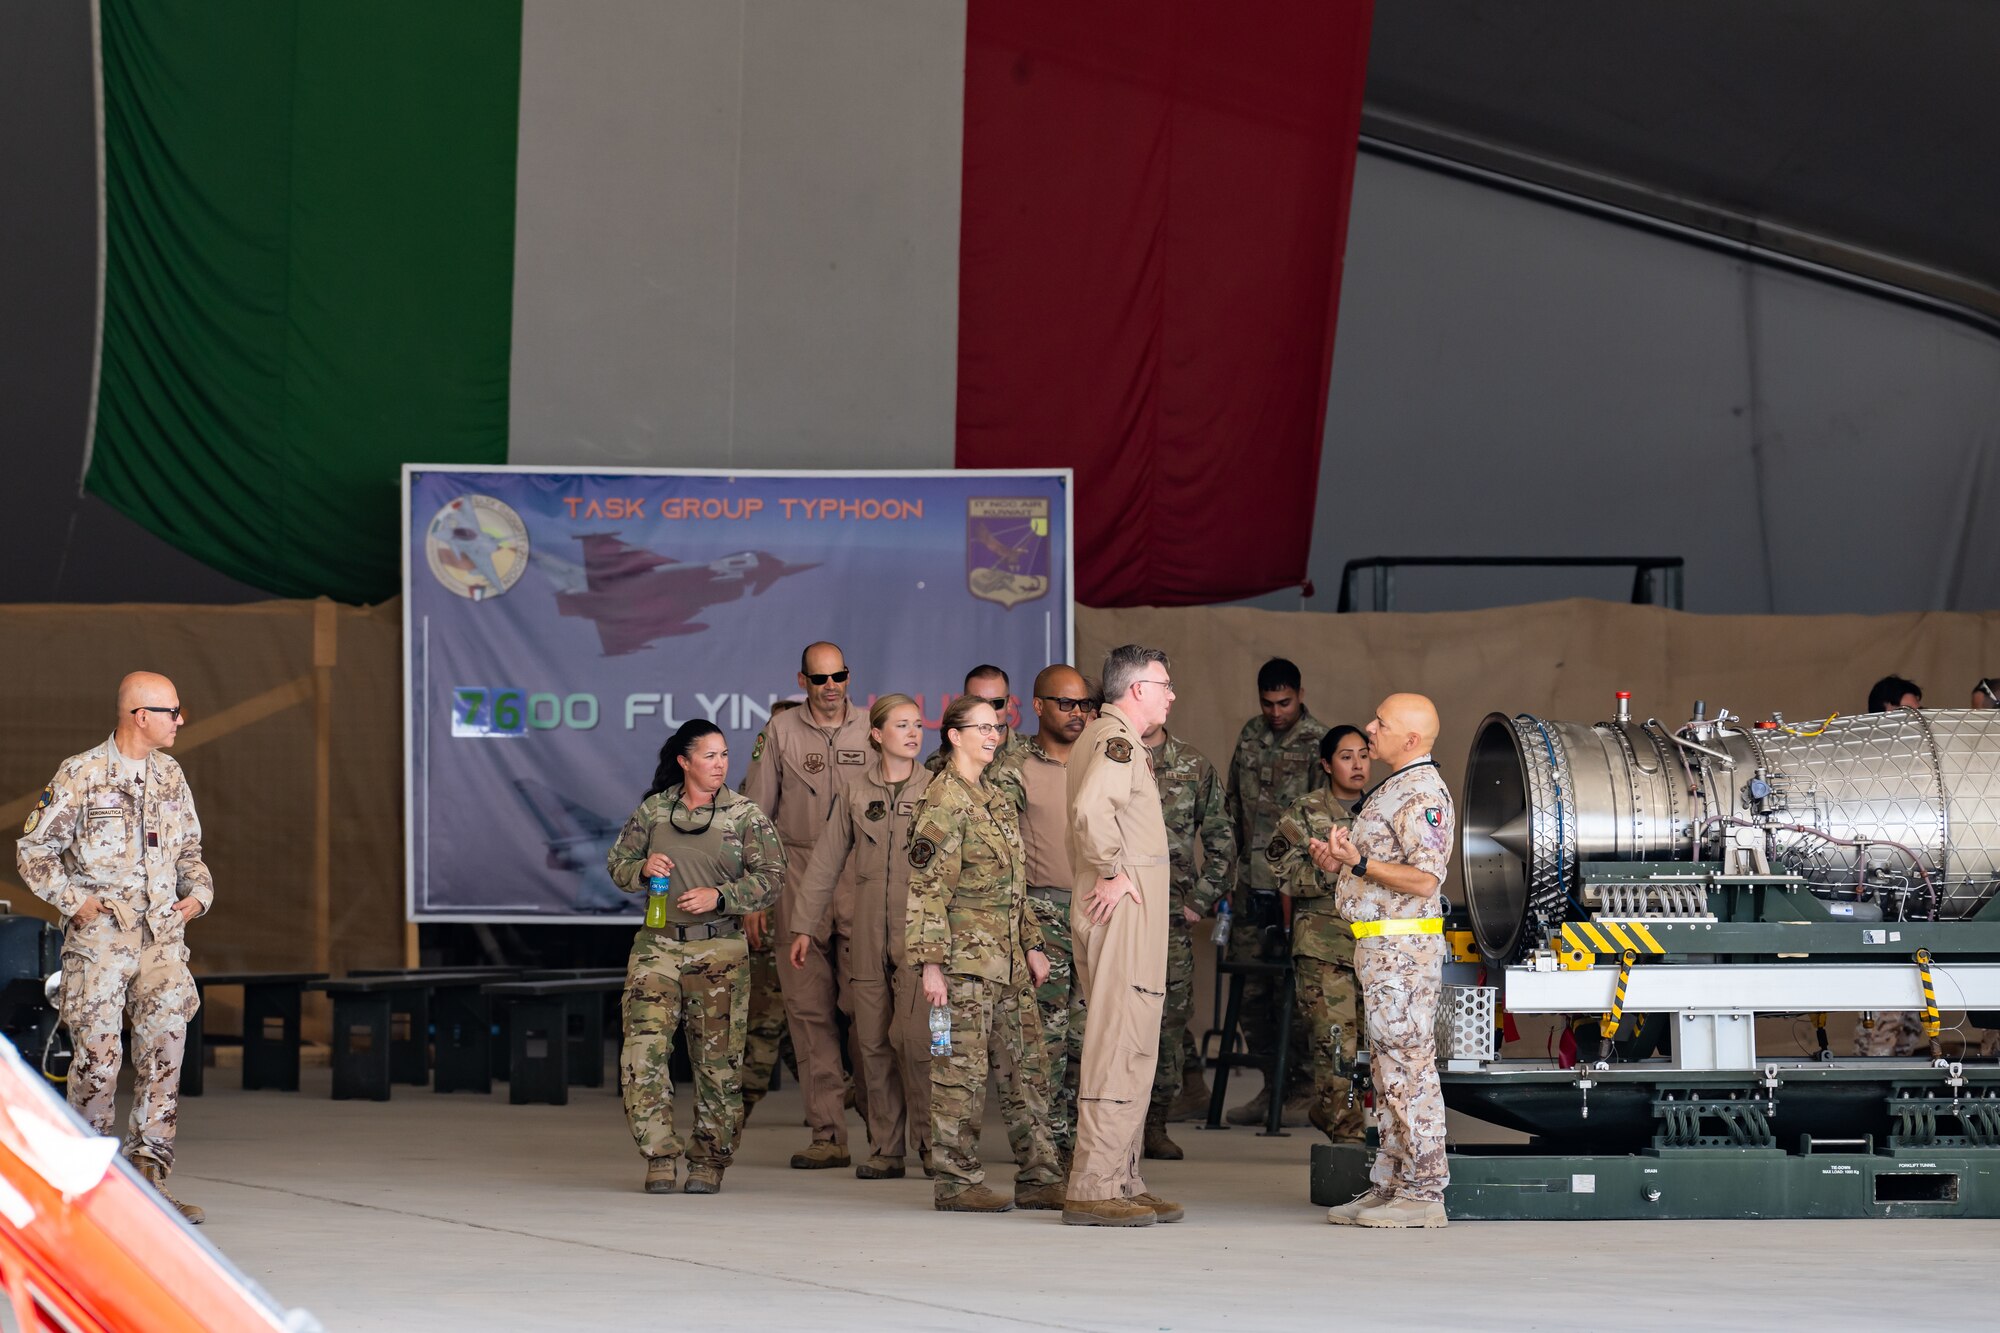 U.S. Air Force service members assigned to the 386th Air Expeditionary Wing learn about the Italian Air Force Eurofighter Typhoon and its mission at Ali Al Salem Air Base, Kuwait, Aug. 4, 2023. Our Italian Air Force counterparts opened their doors to all of the coalition partners here for this unique educational opportunity, increasing the interoperability of our forces and enhancing our ability to project decisive combat power together across the theater. (U.S. Air Force photo by Staff Sgt. Kevin Long)